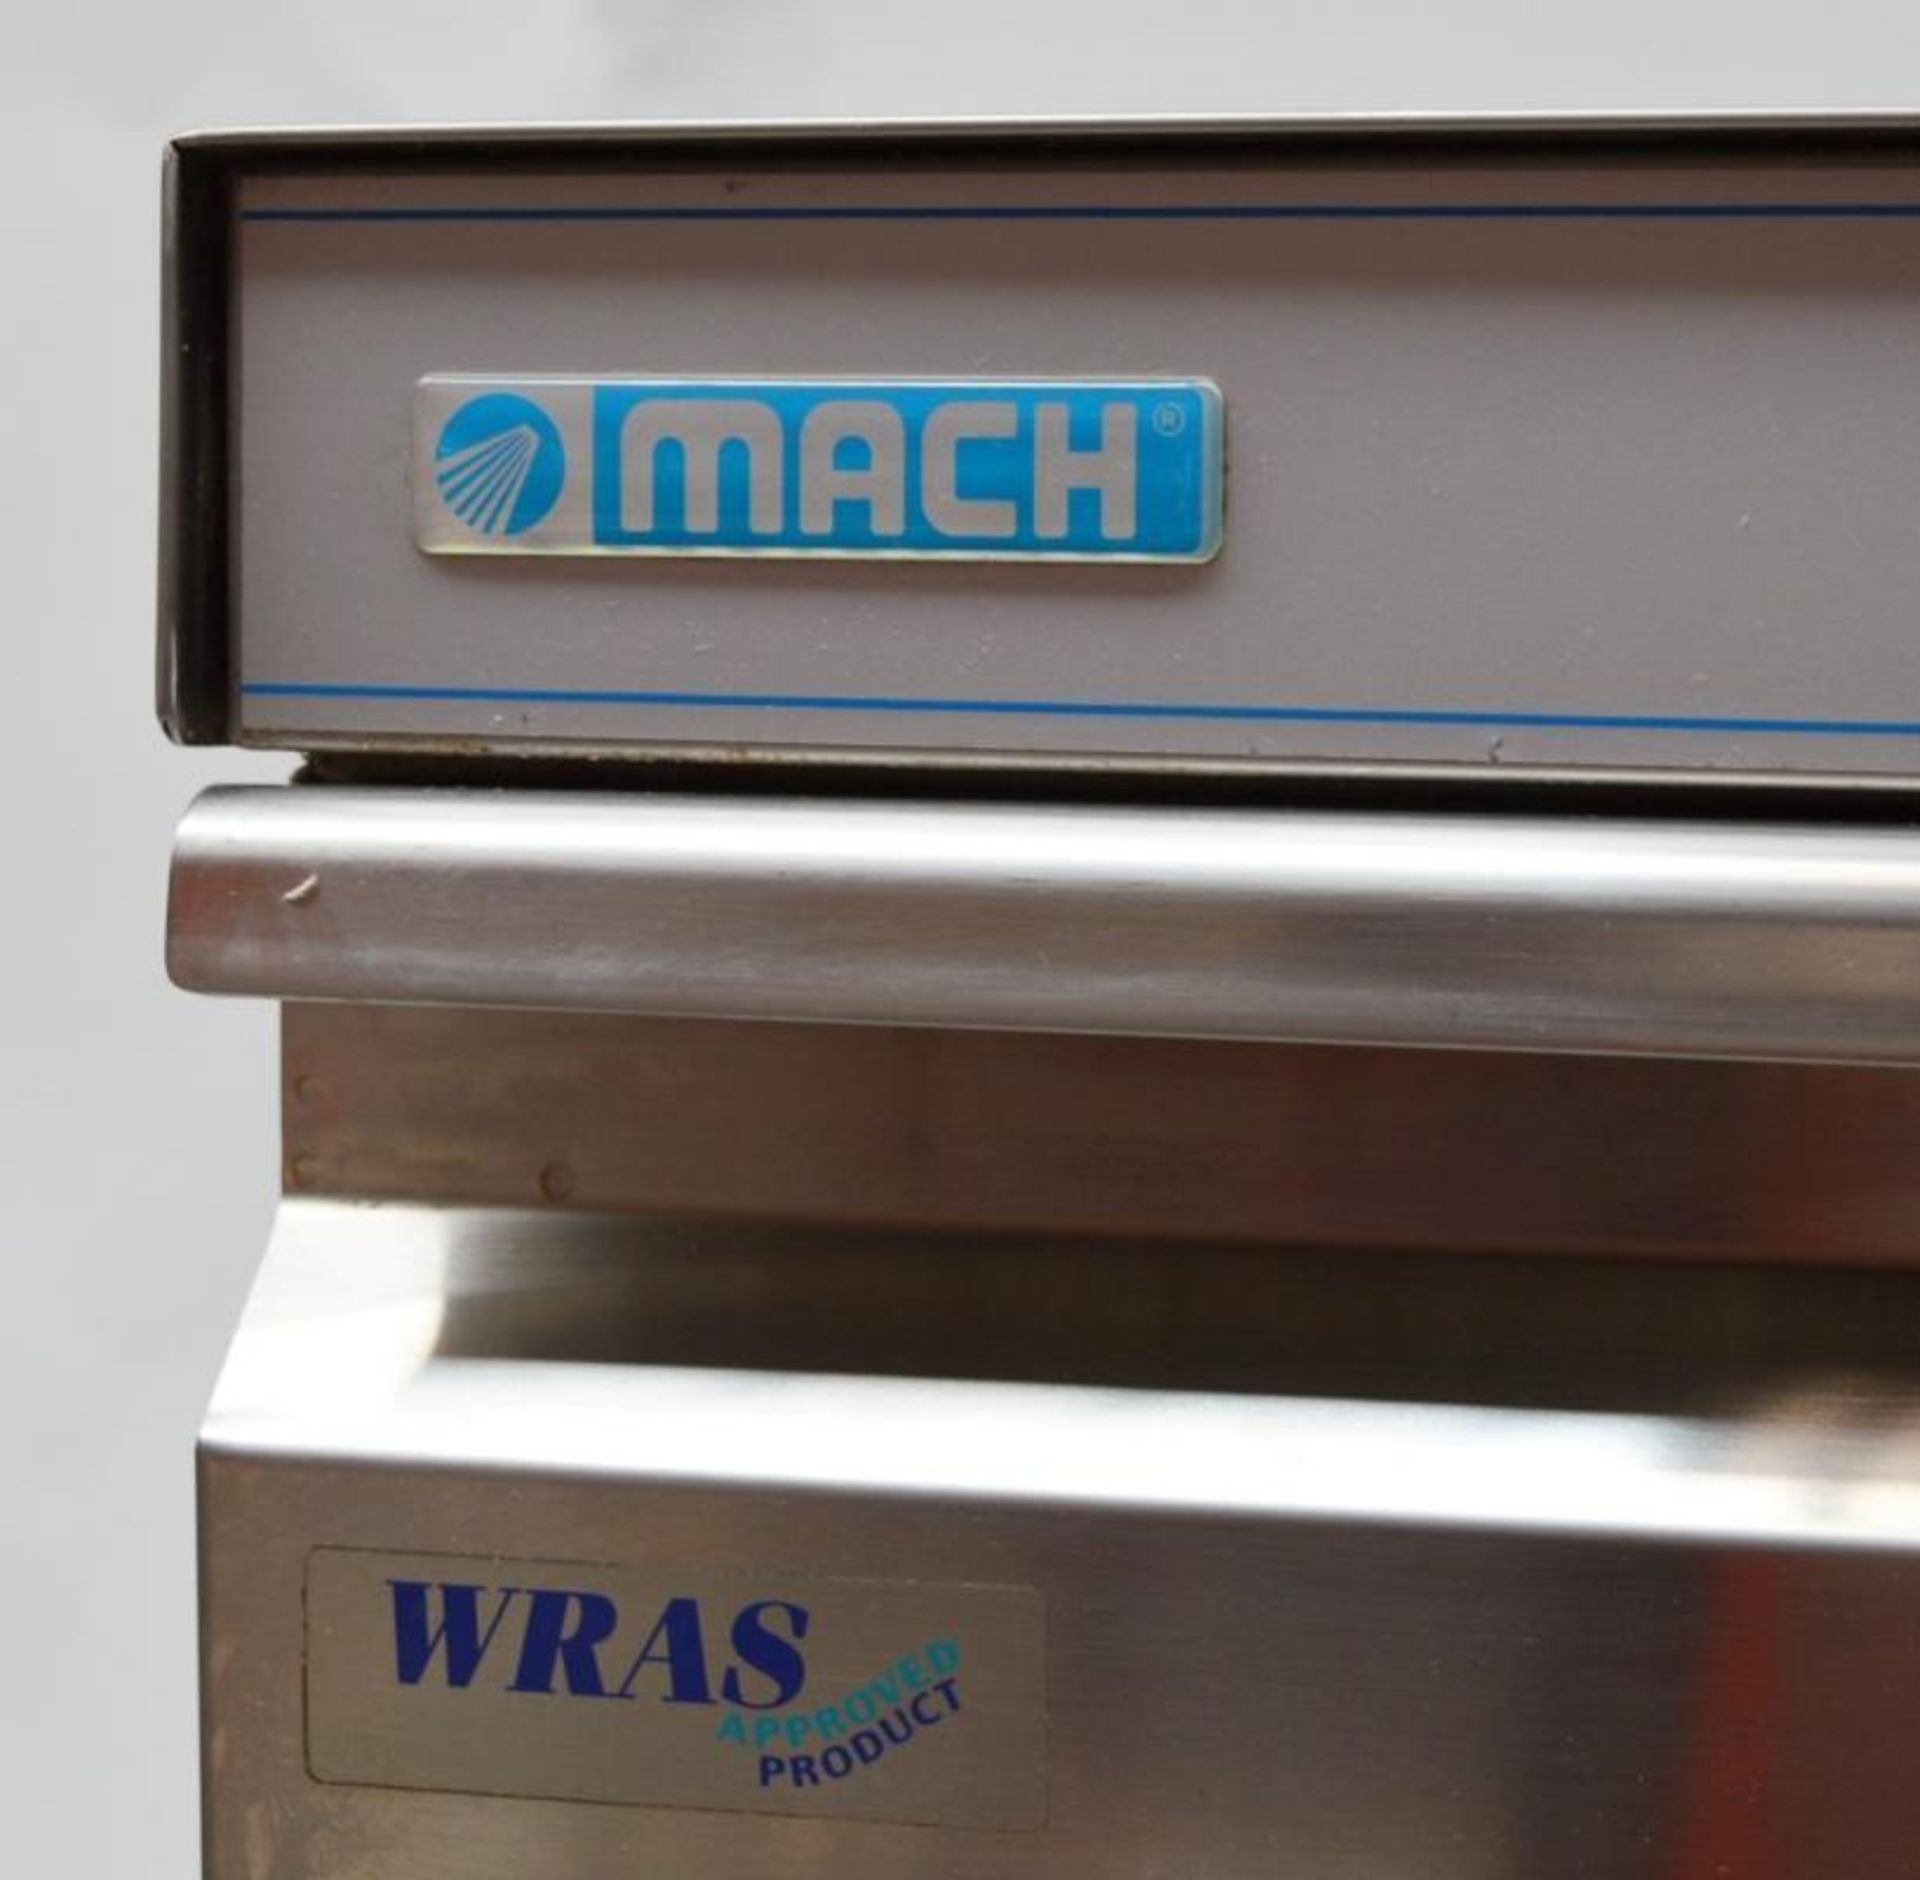 1 x MACH Commercial Glasswasher - Compact Size H65 x W41 x D49.5 cms - Stainless Steel Finish - 240v - Image 6 of 7